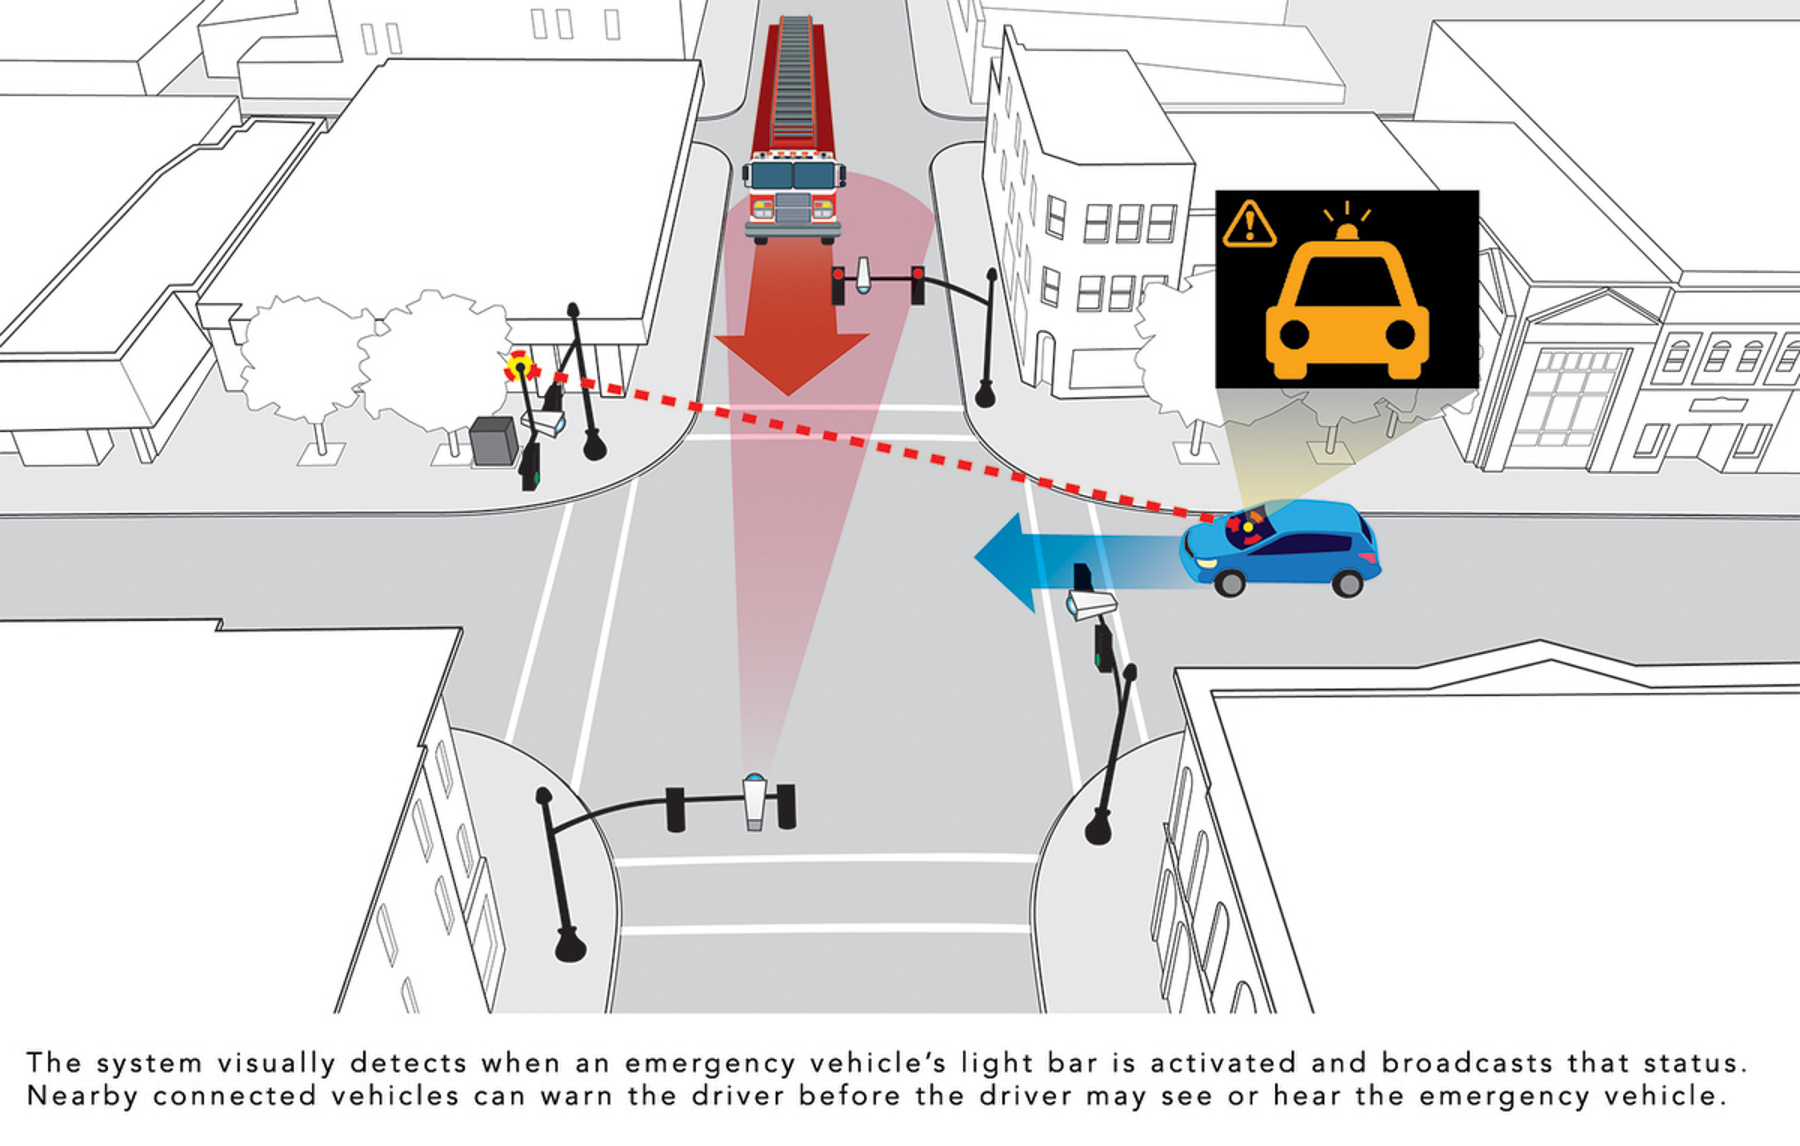 Honda Ã¬Smart IntersectionÃ® technology for vehicle-to-everything (V2X) communication is designed to reduce traffic collisions at roadway intersections.